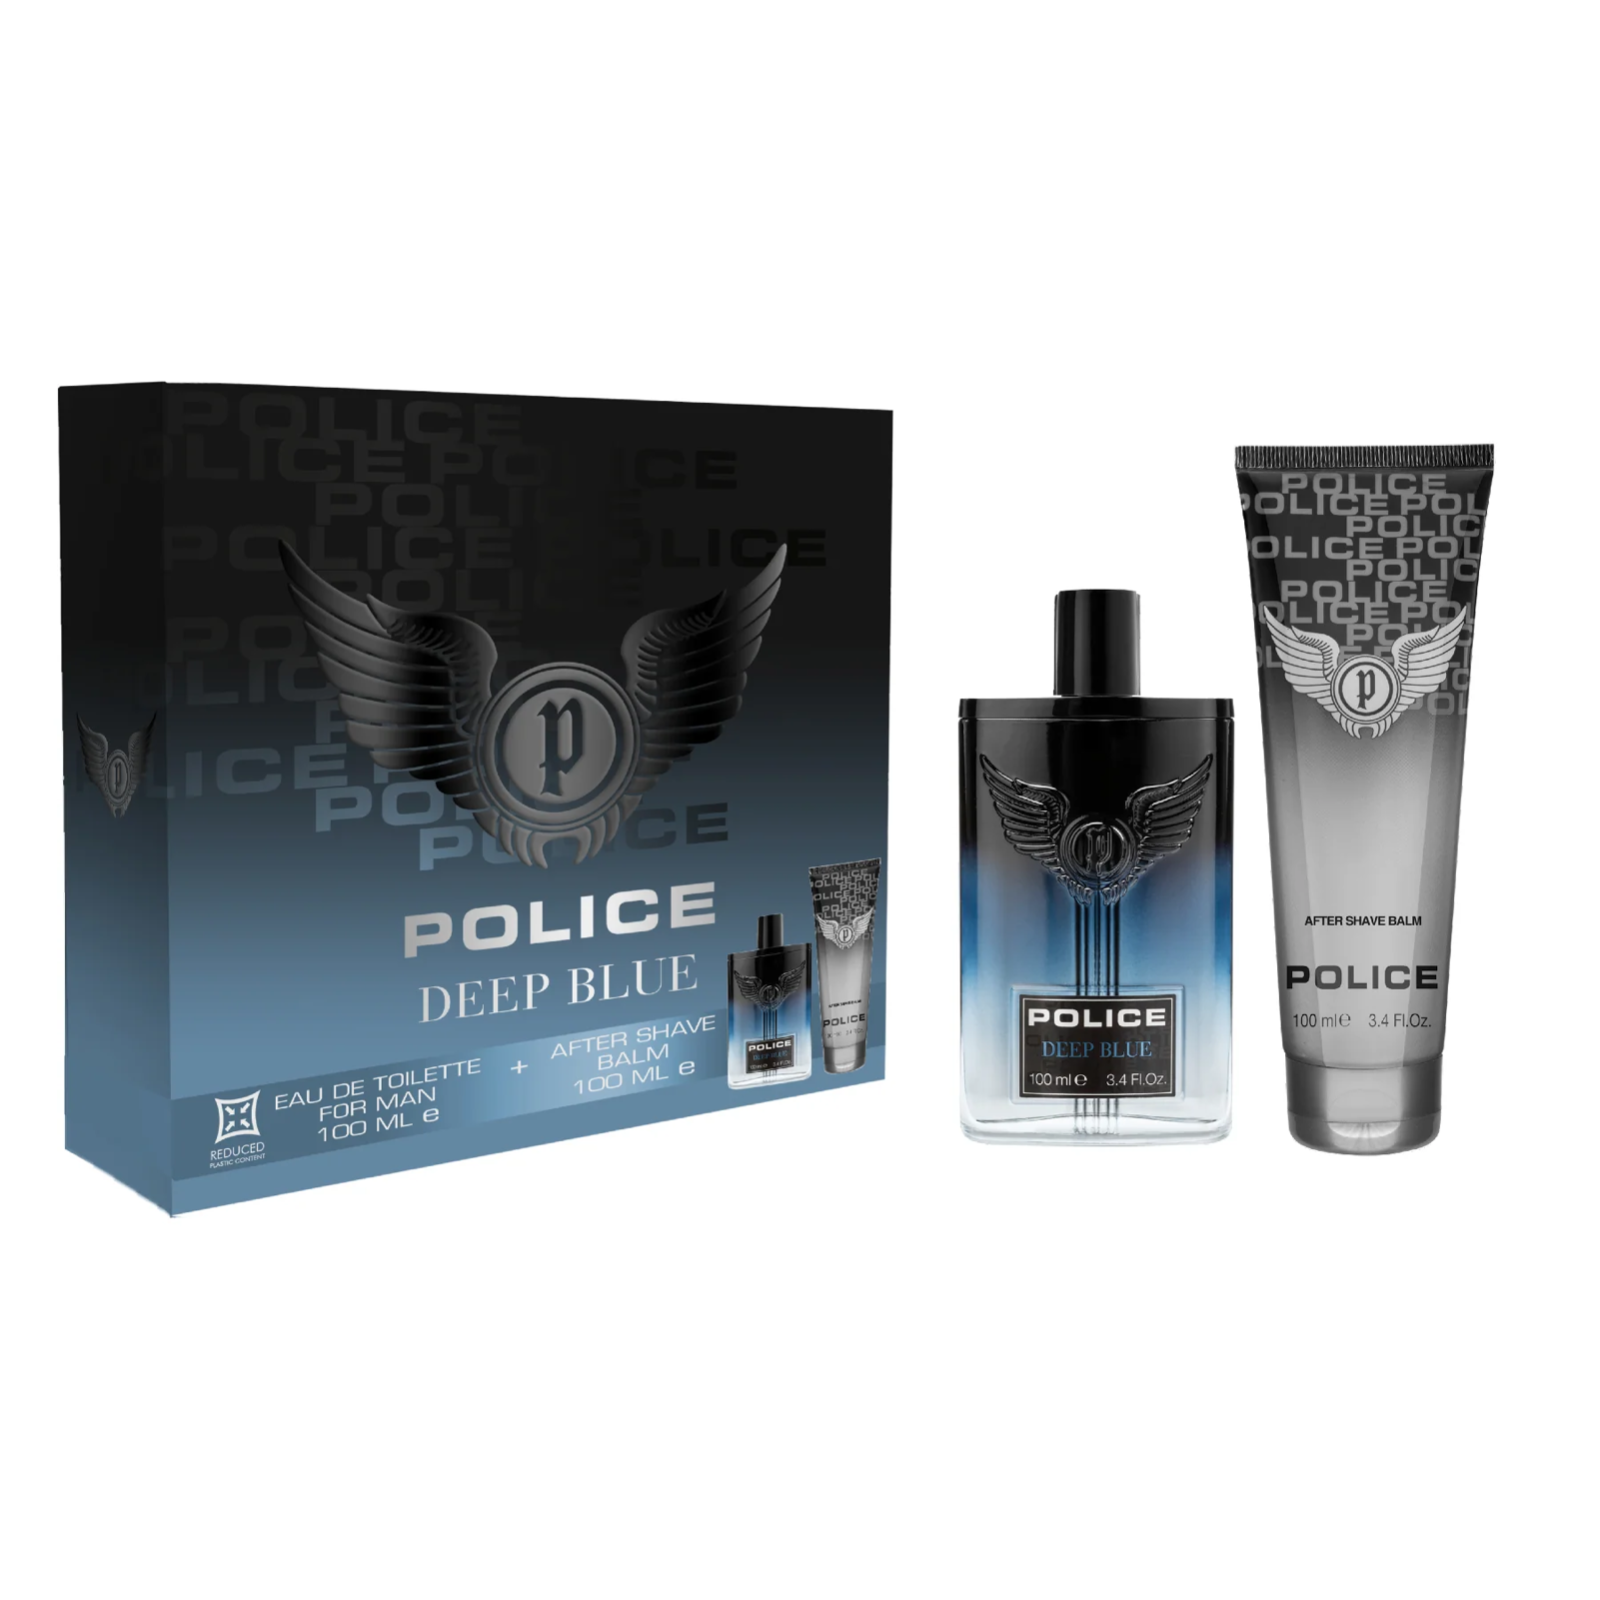 Police Deep Blue Natural Spray & After Shave Balm 100ml Gift Set RRP £35 CLEARANCE XL £29.99